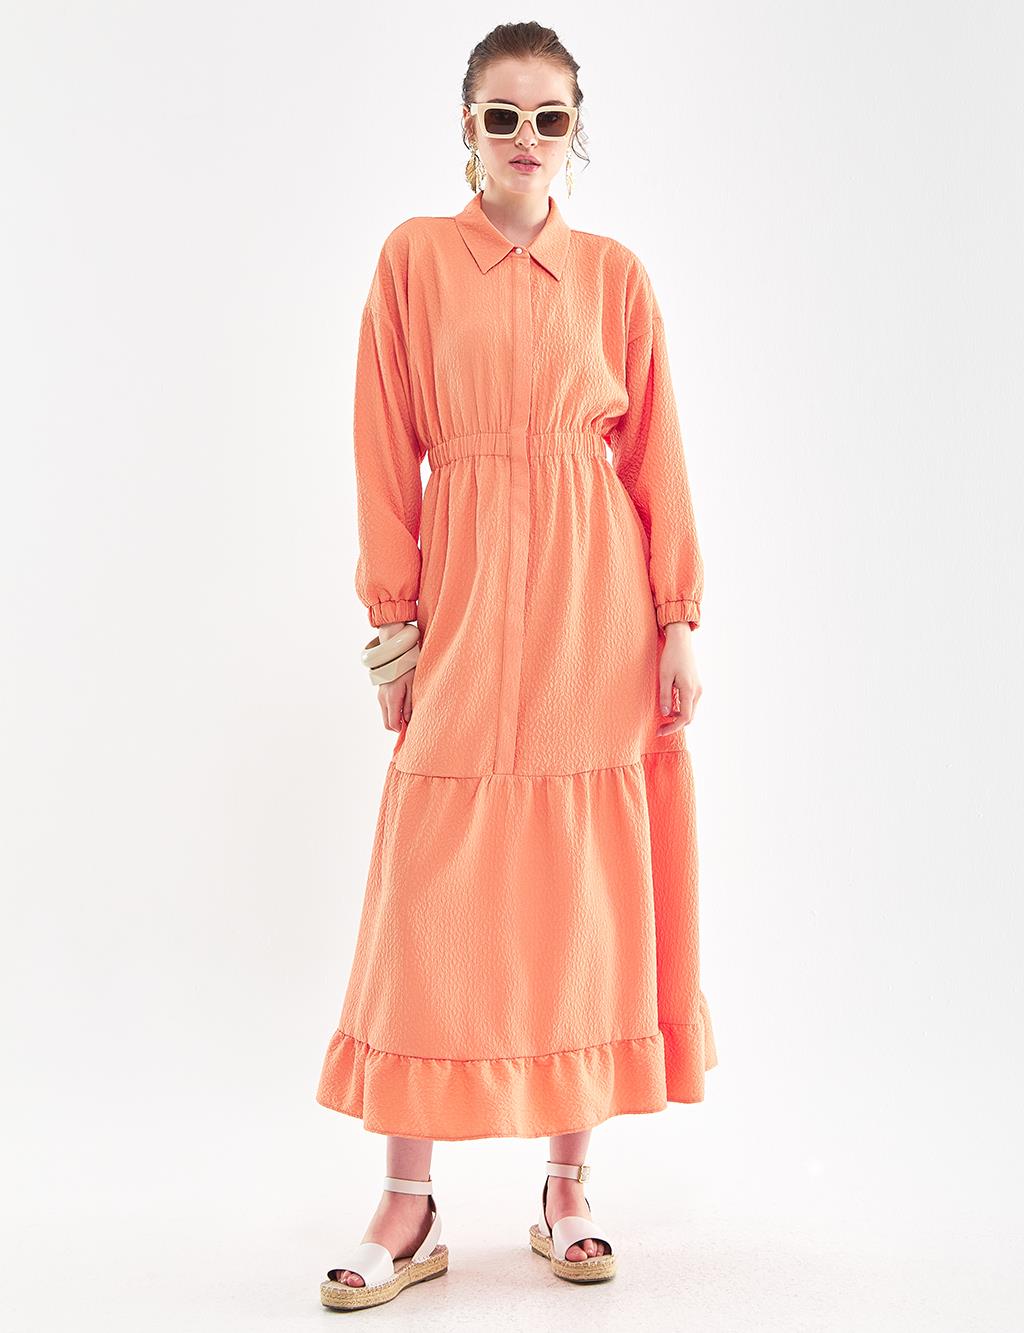 Layered Relief Pattern Dress Peach